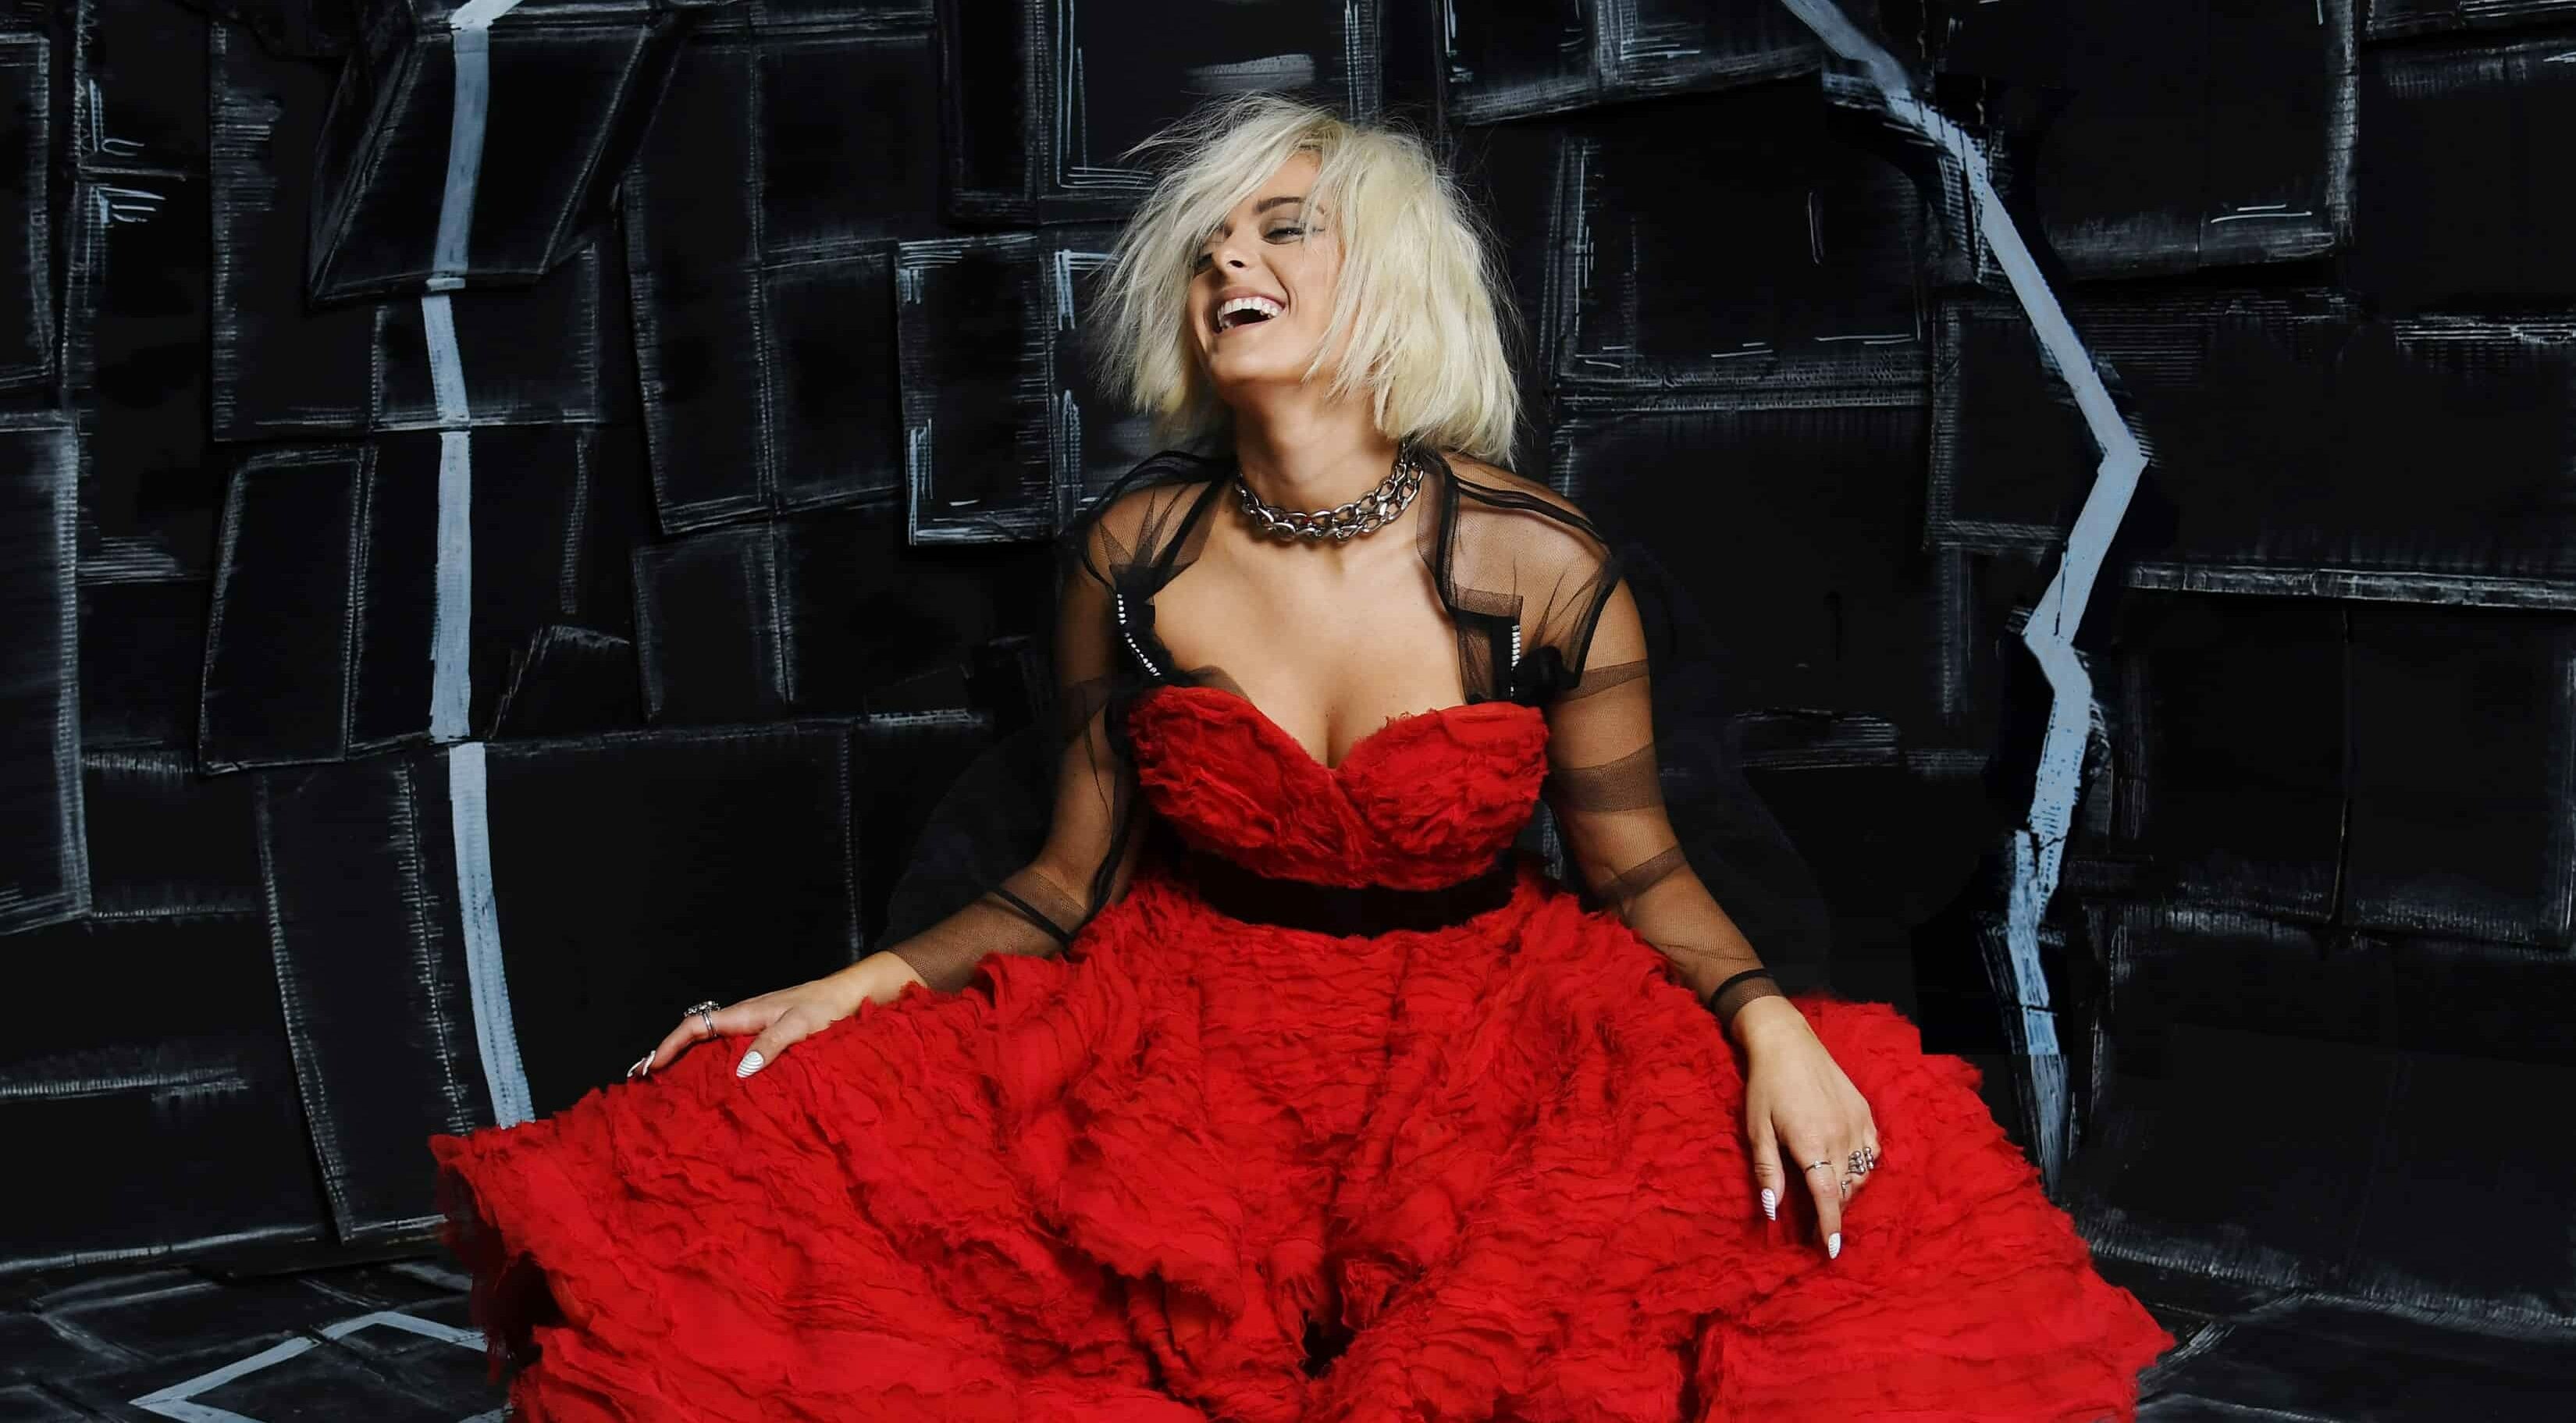 Bebe Rexha: "I Got You" was released on October 28, 2016, as the lead single from her second extended play. 3300x1830 HD Wallpaper.